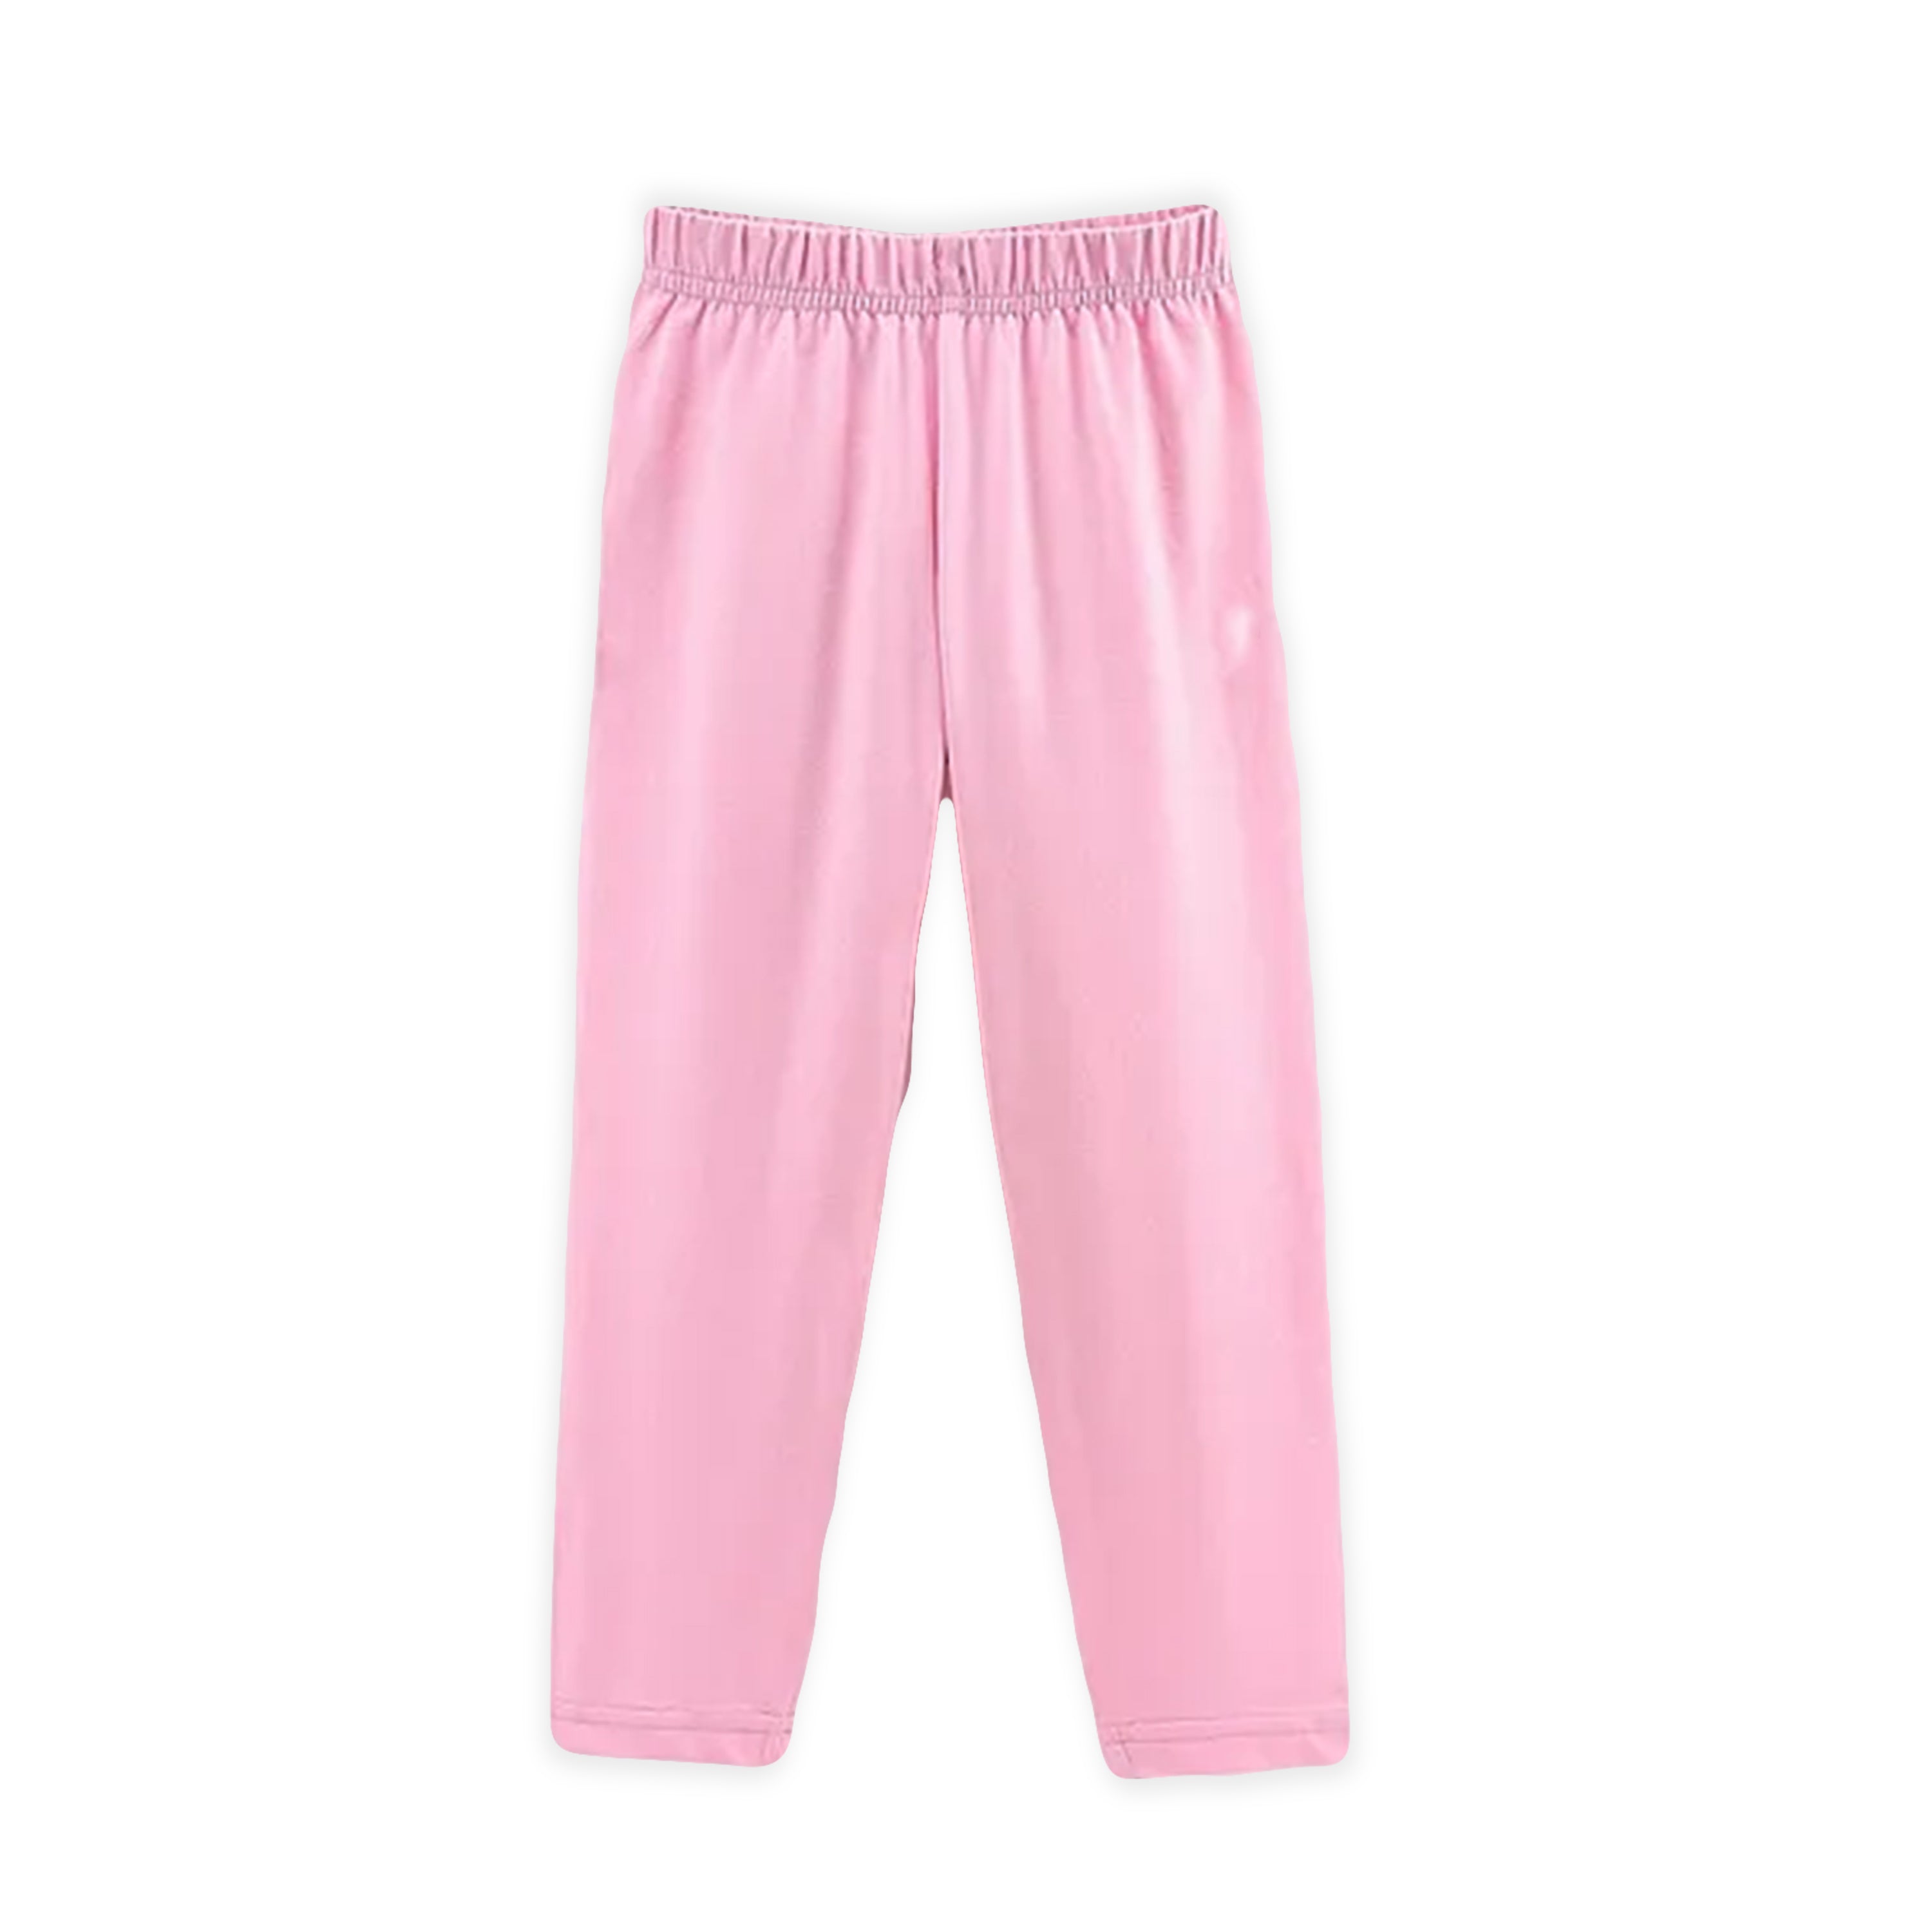 Kids Pink Solid Cotton Track pants